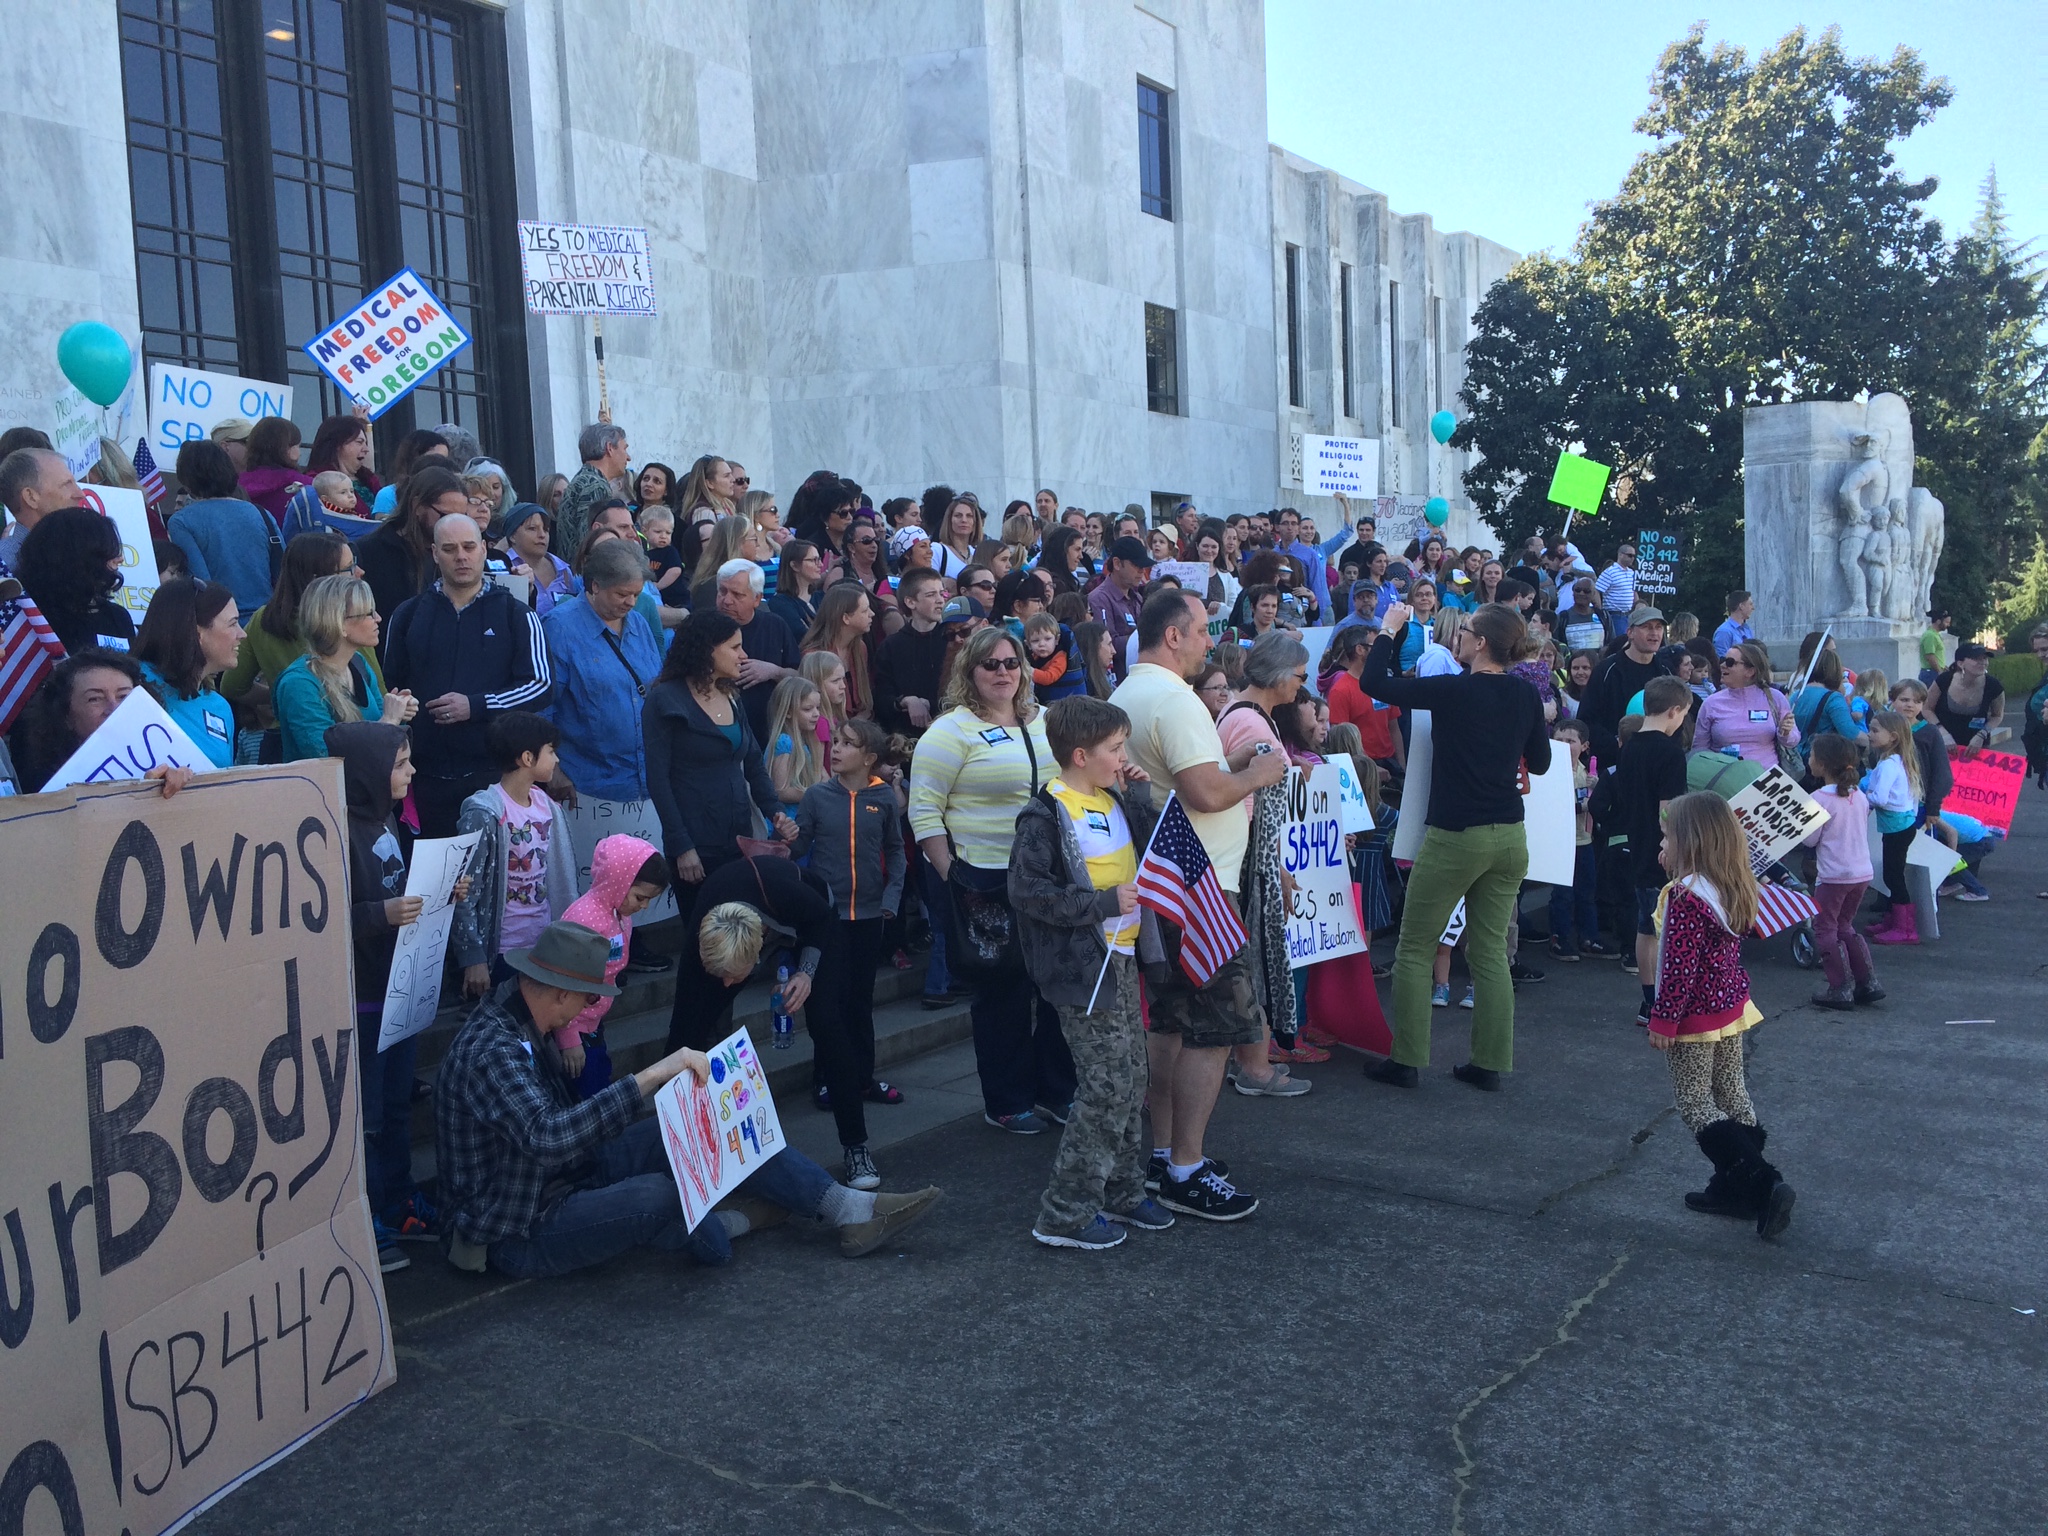 Over 300 people attended the rally for medical freedom on March 9, 2015 in Salem, Oregon